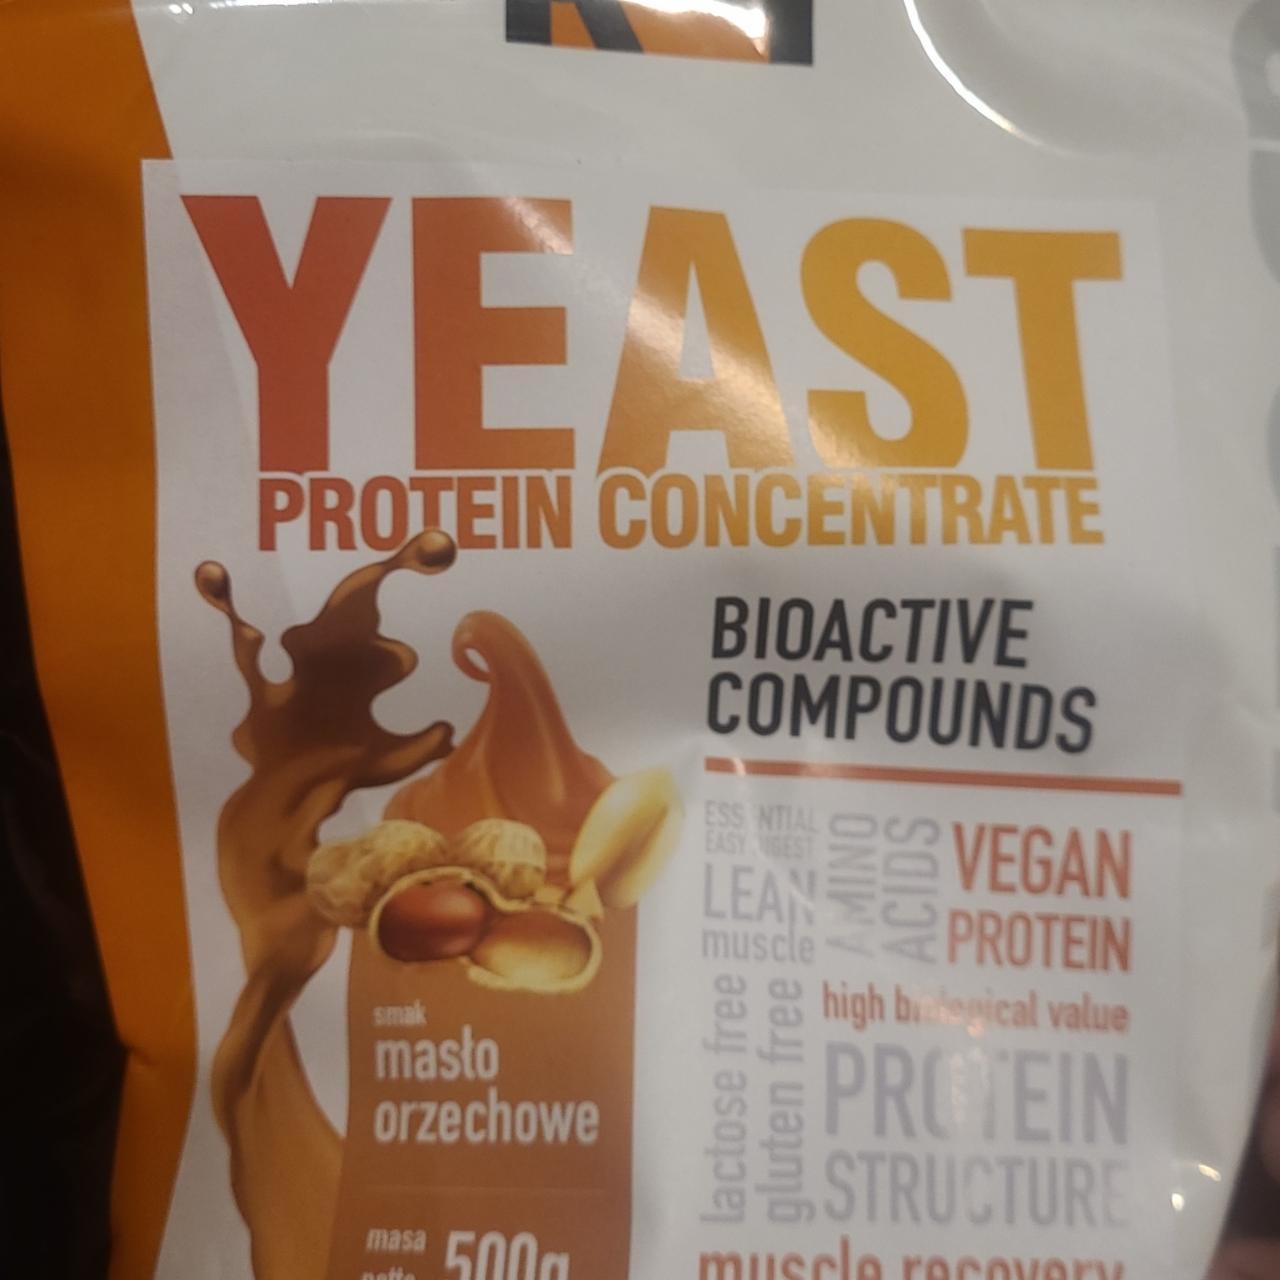 Zdjęcia - Yeast Protein Concentrate R2G